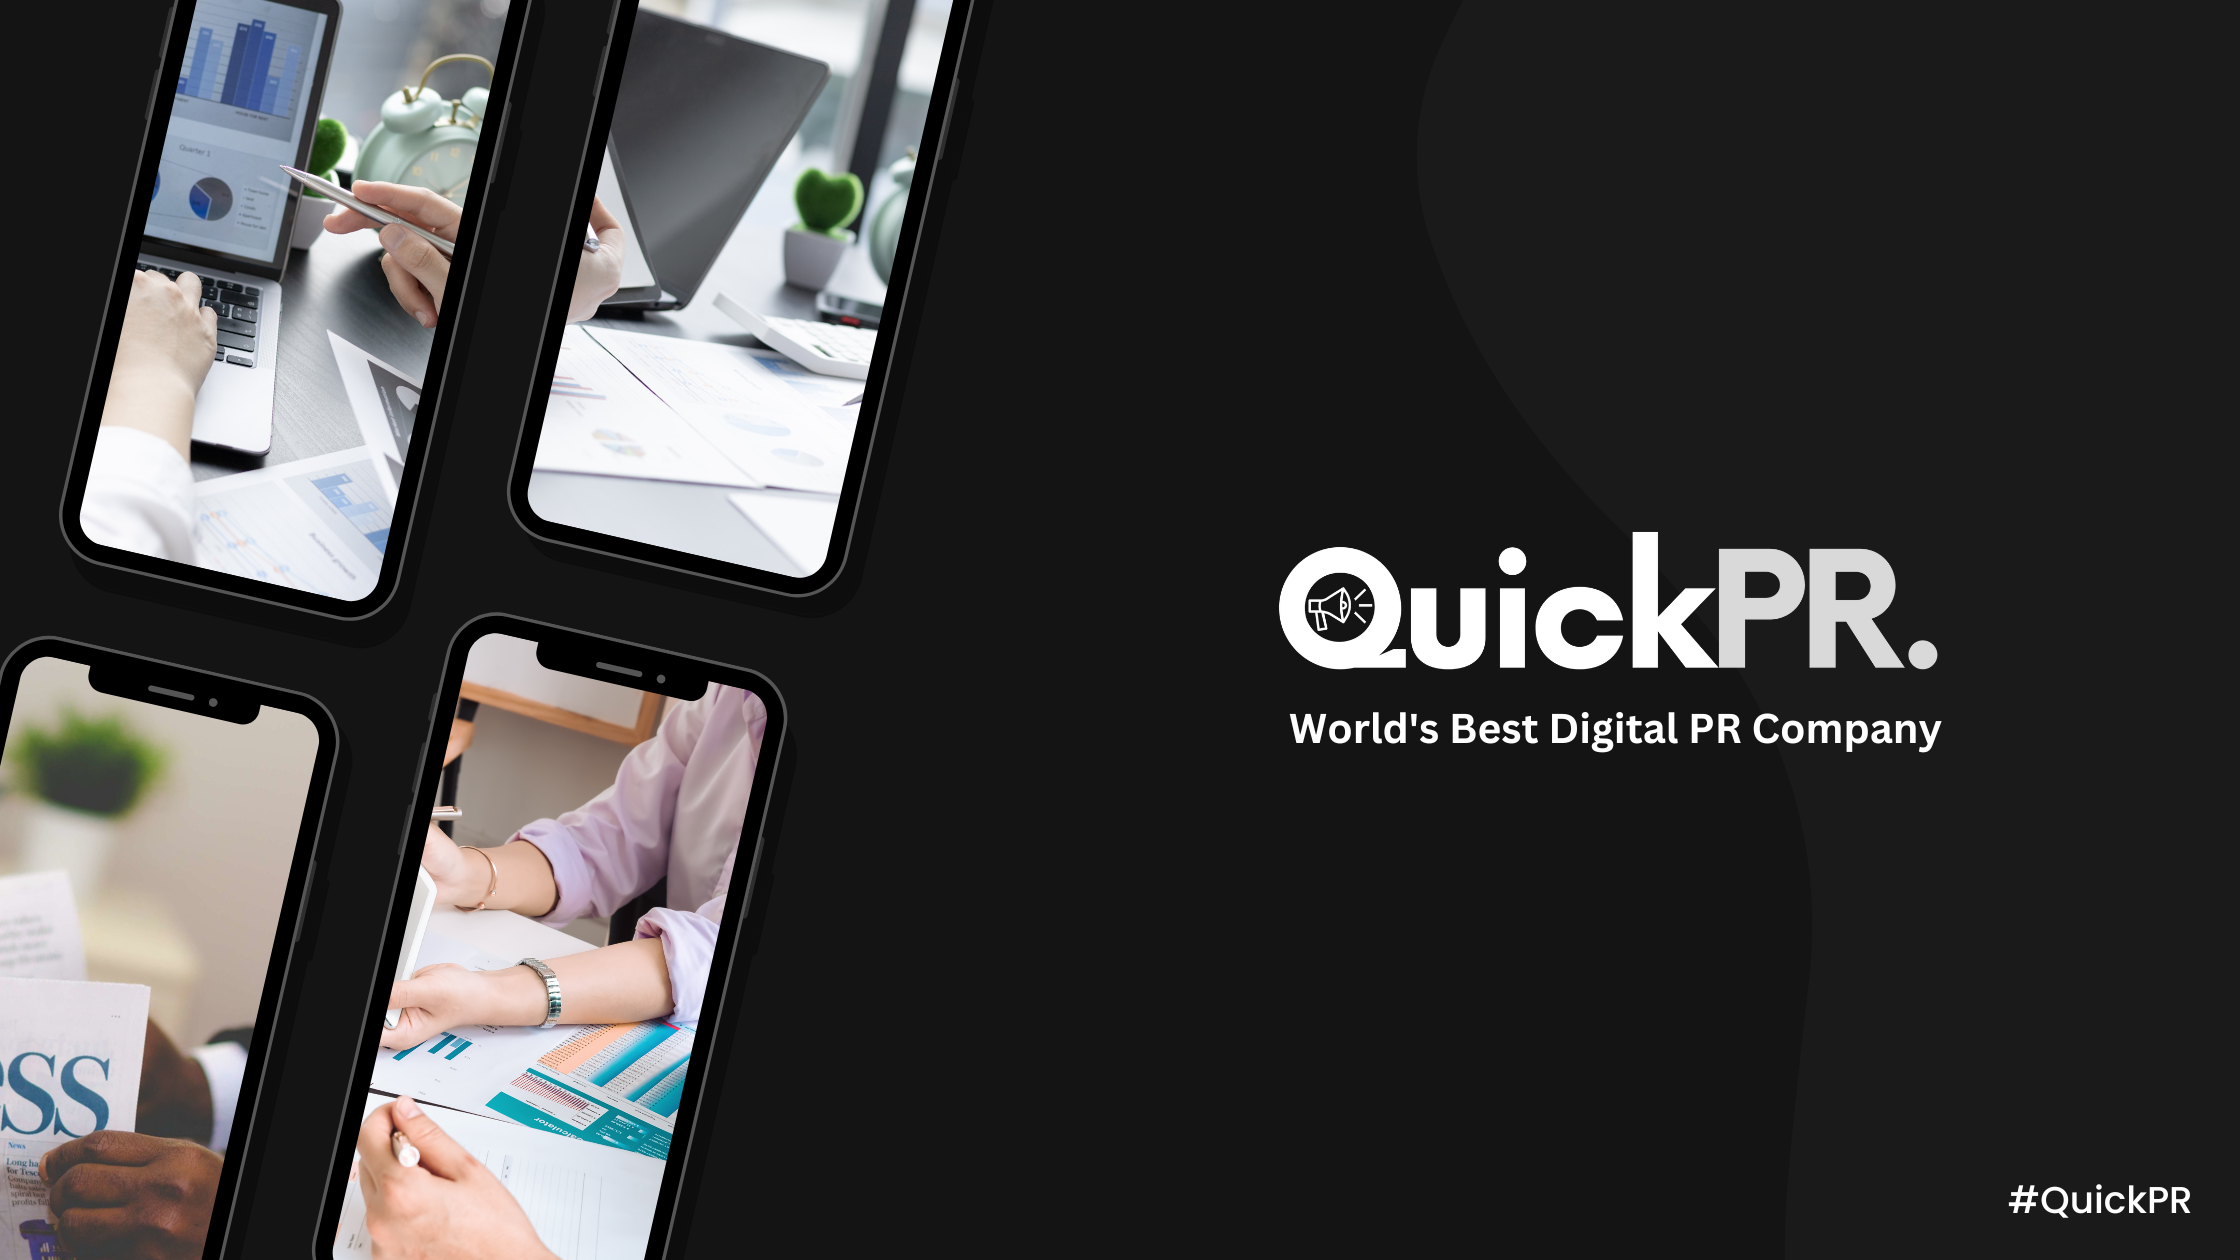 Get Noticed: Why Startups Should Consider QuickPR: World’s Best Digital PR Company for Their Public Relations Needs